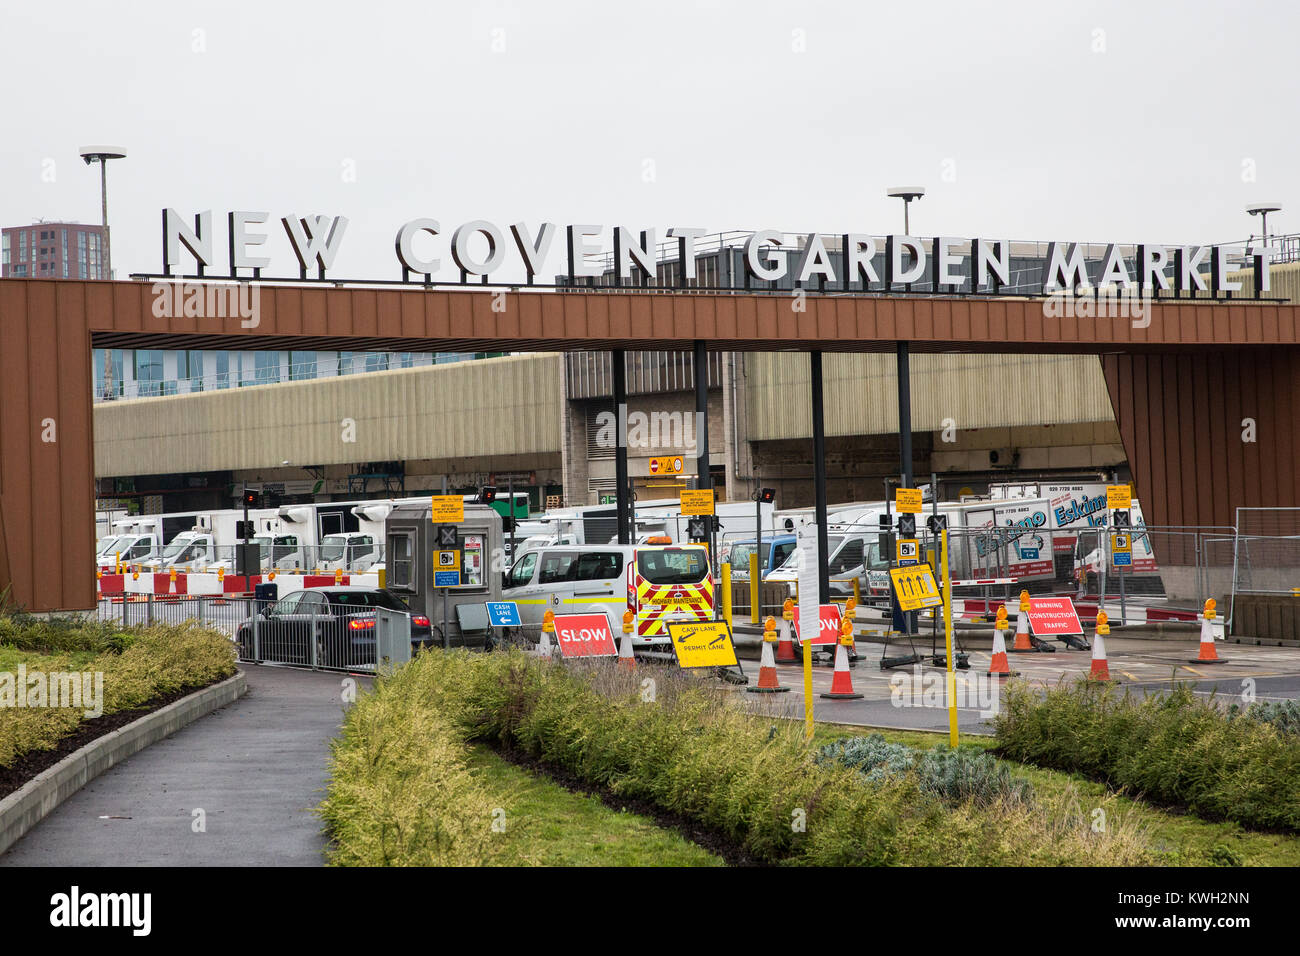 London Uk 20th December 2017 The Entrance To New Covent Garden Market At Nine Elms Stock Photo Alamy